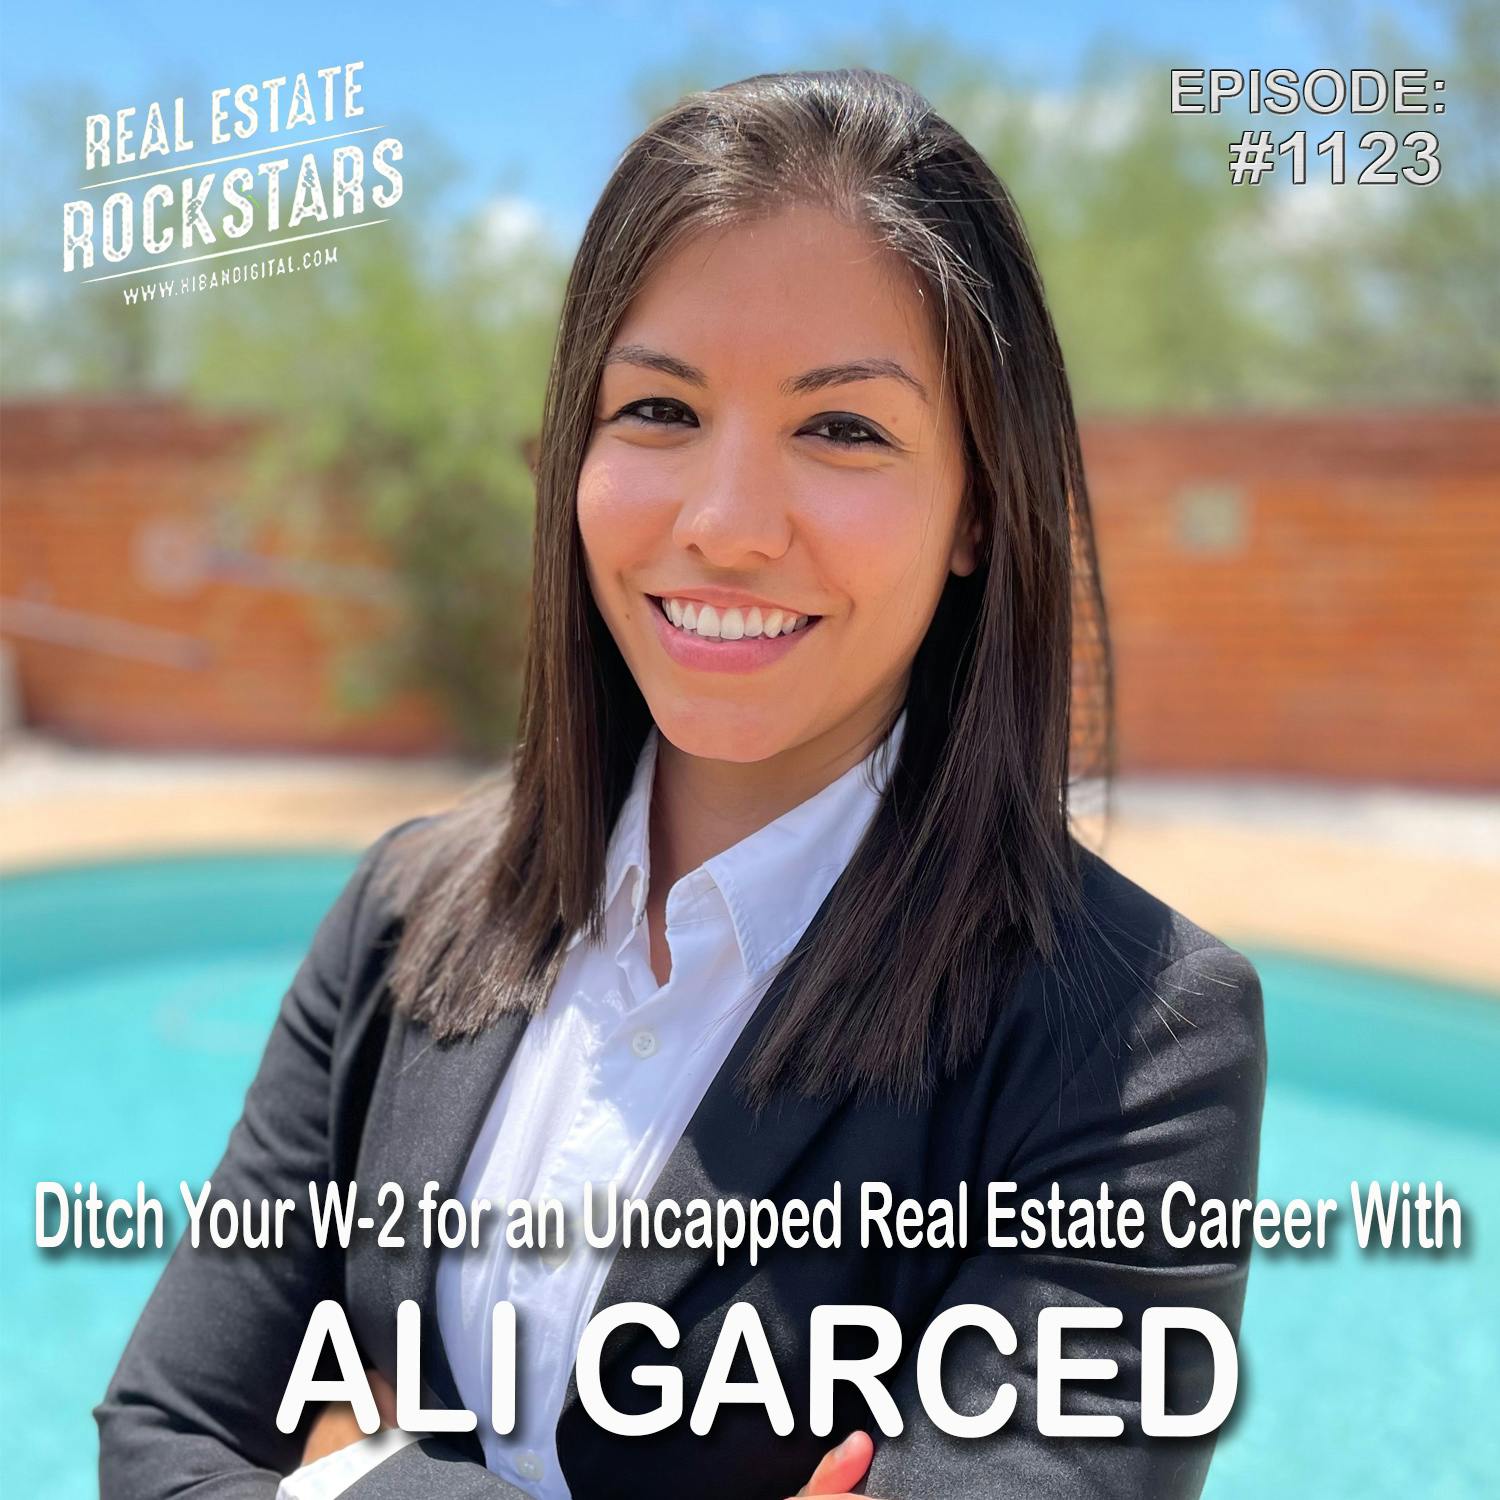 1123: Ditch Your W-2 for an Uncapped Real Estate Career With Ali Garced